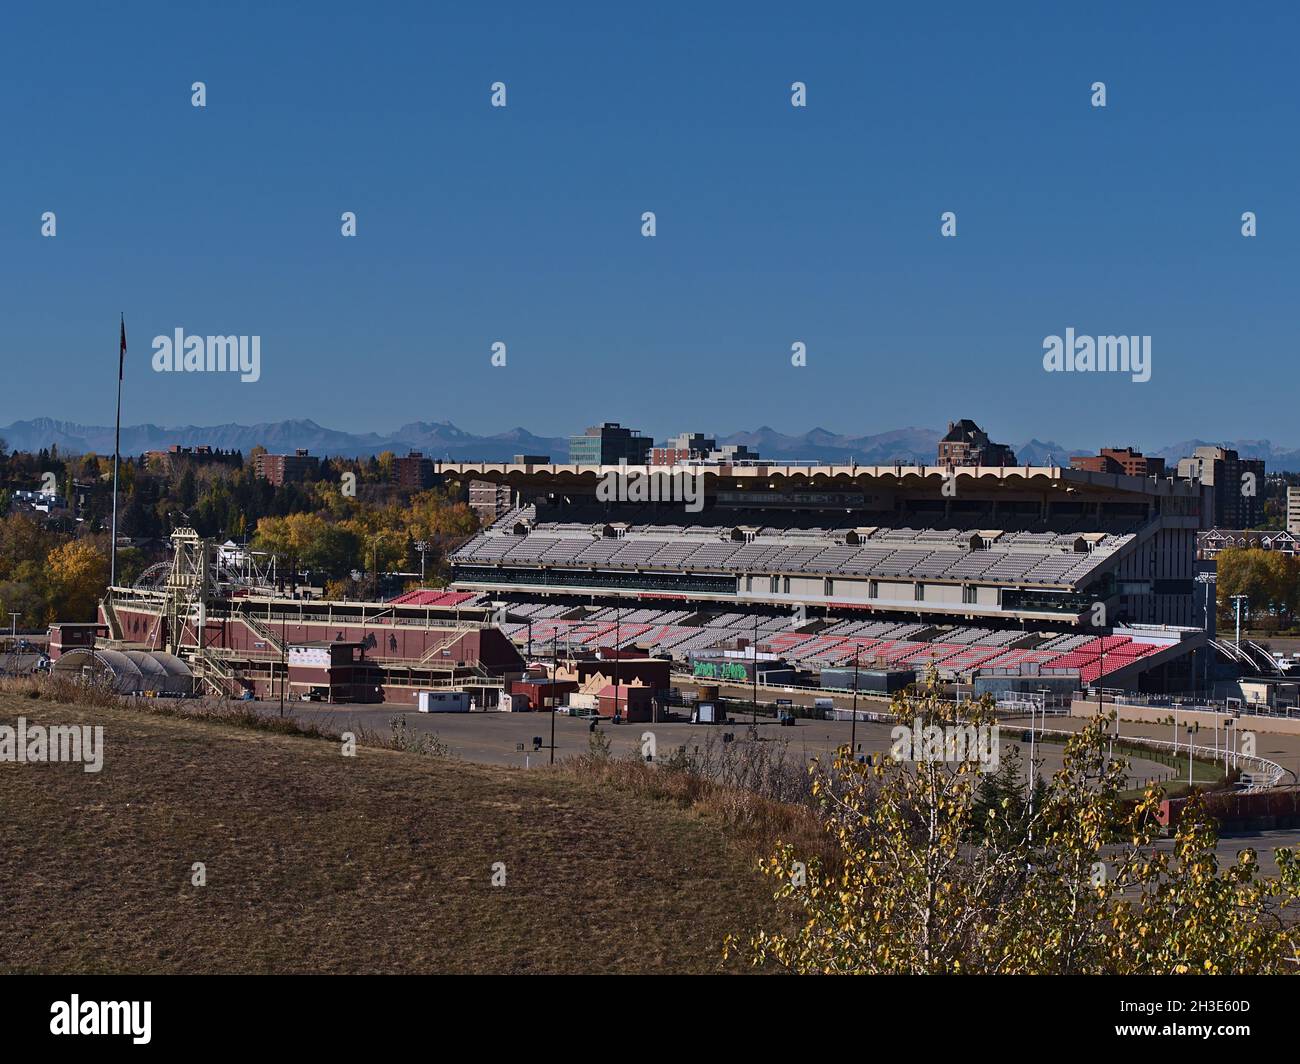 View of the Stampede Grandstand in Calgary, Canada, a stadium with 17,000 seats and standing room for 8,000 people in autumn with the Rockies. Stock Photo